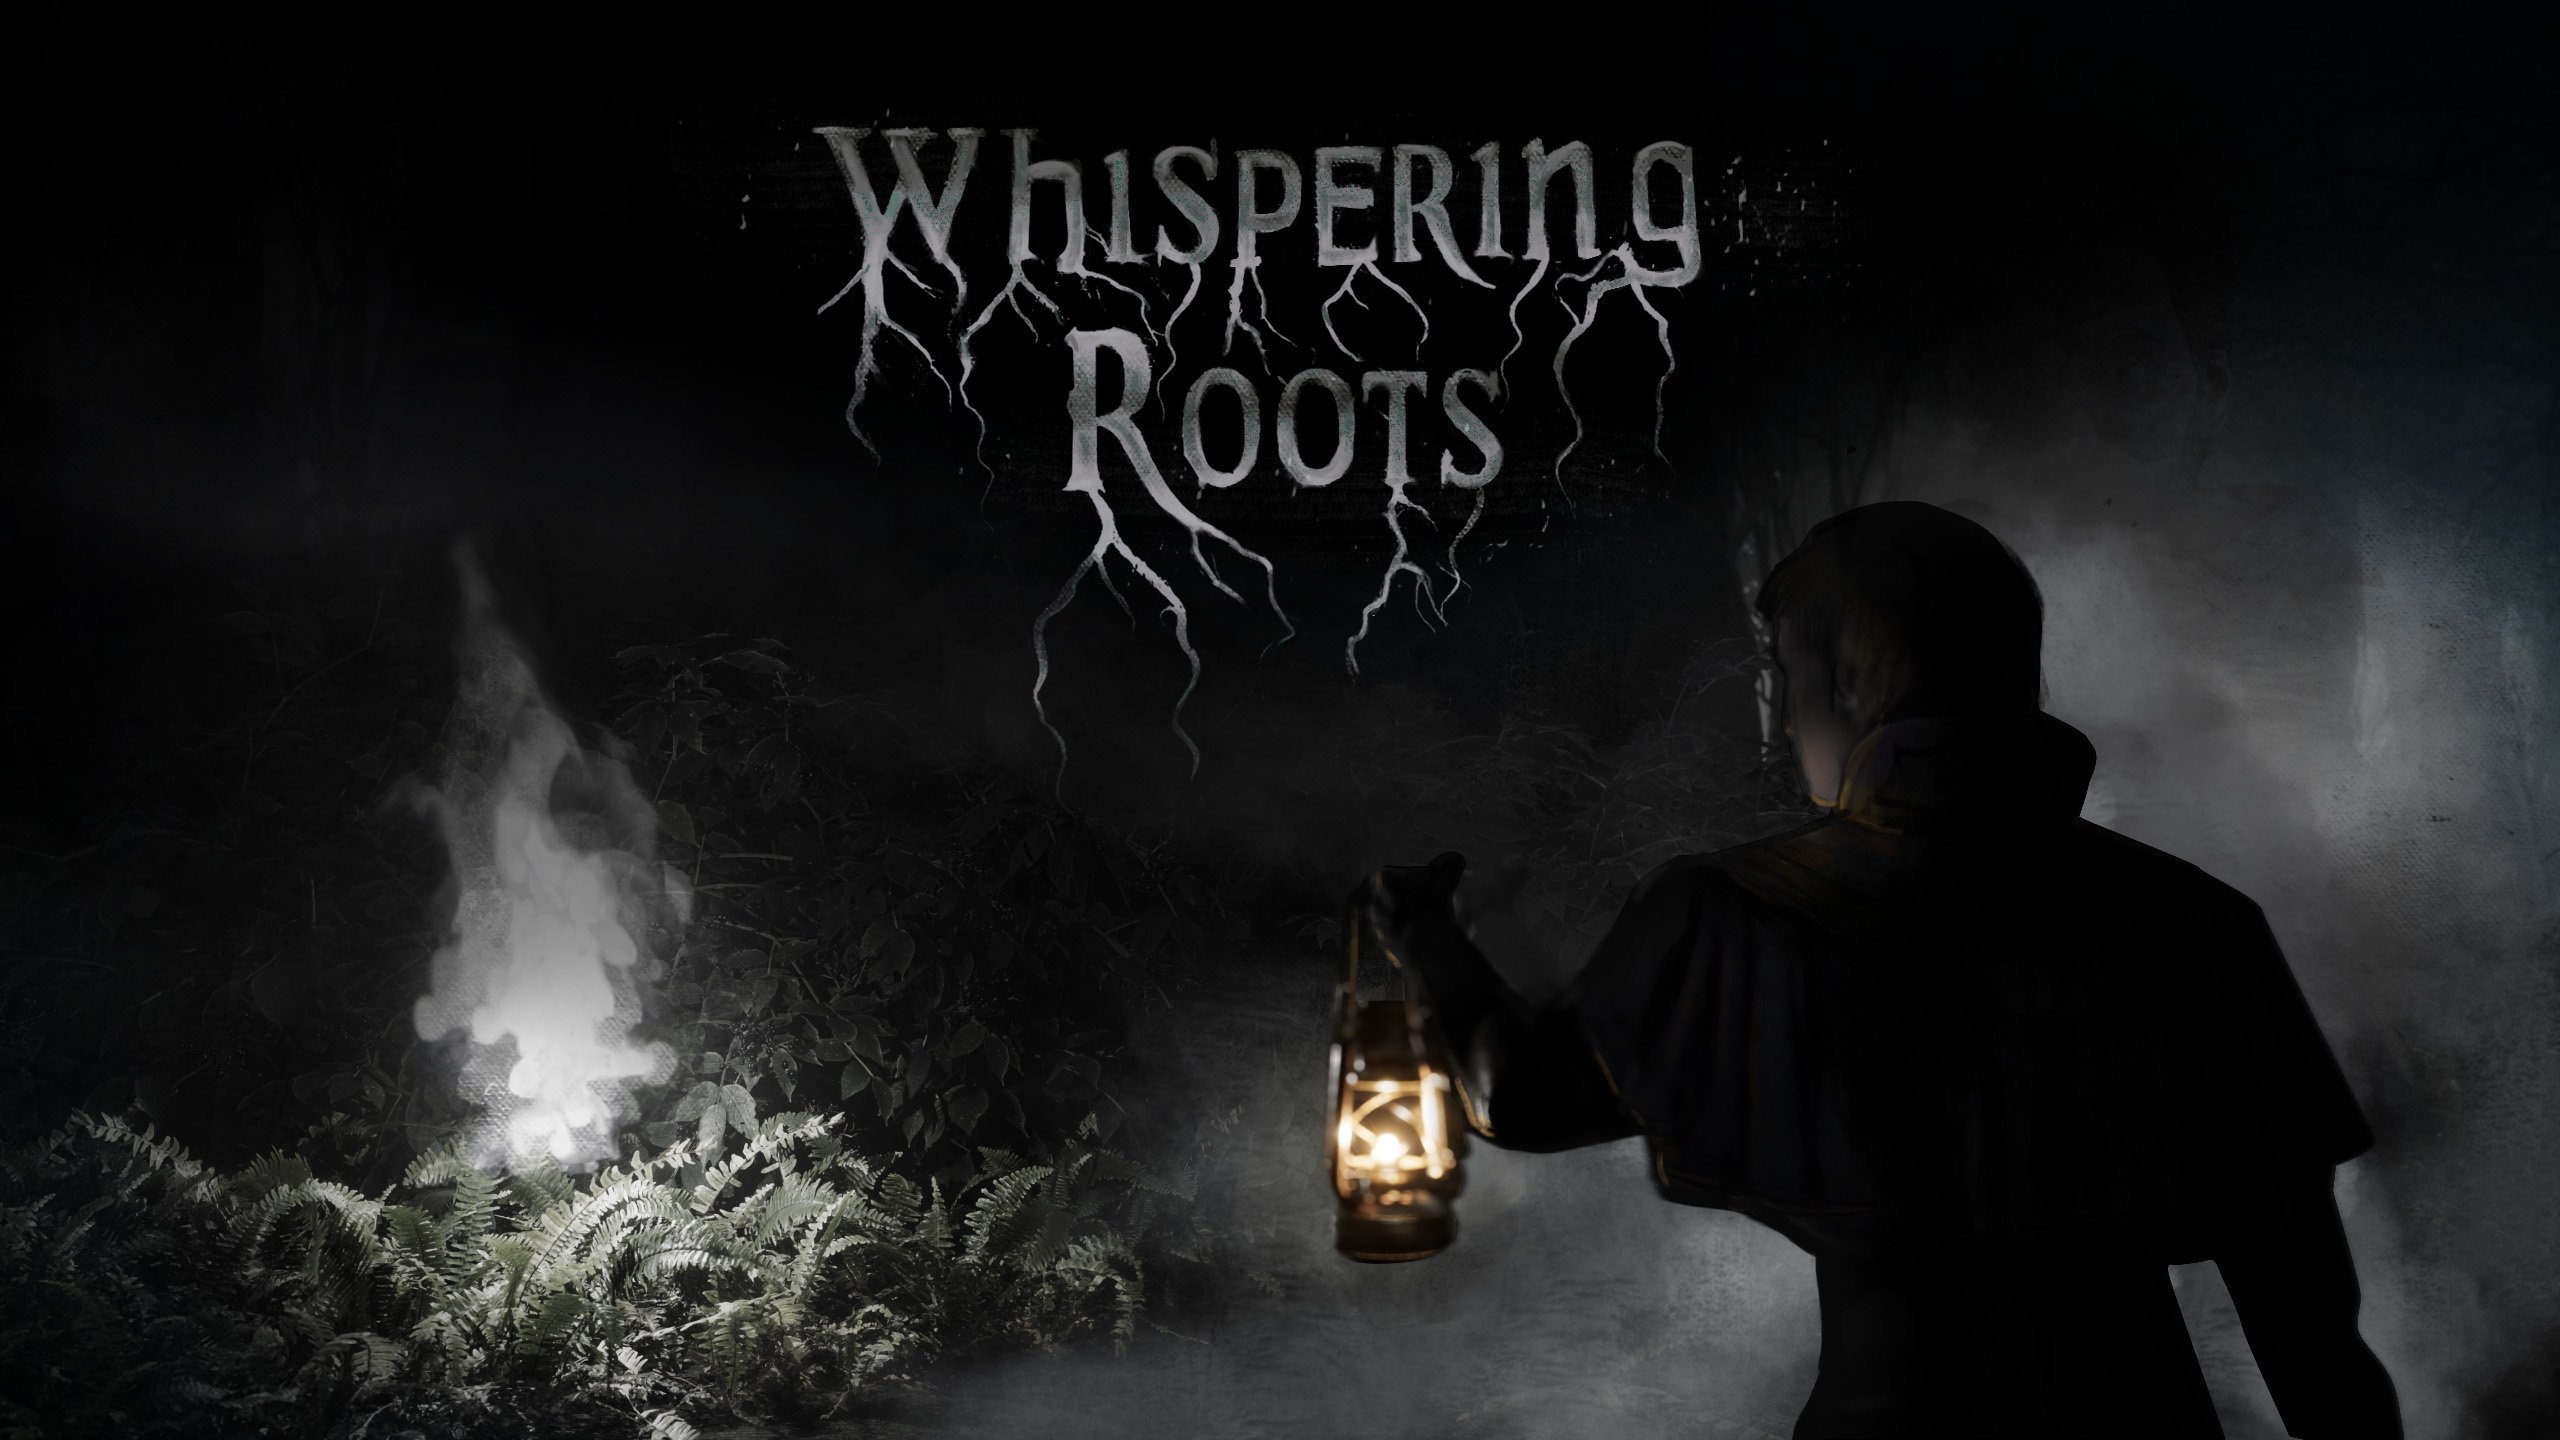 Whispering Roots